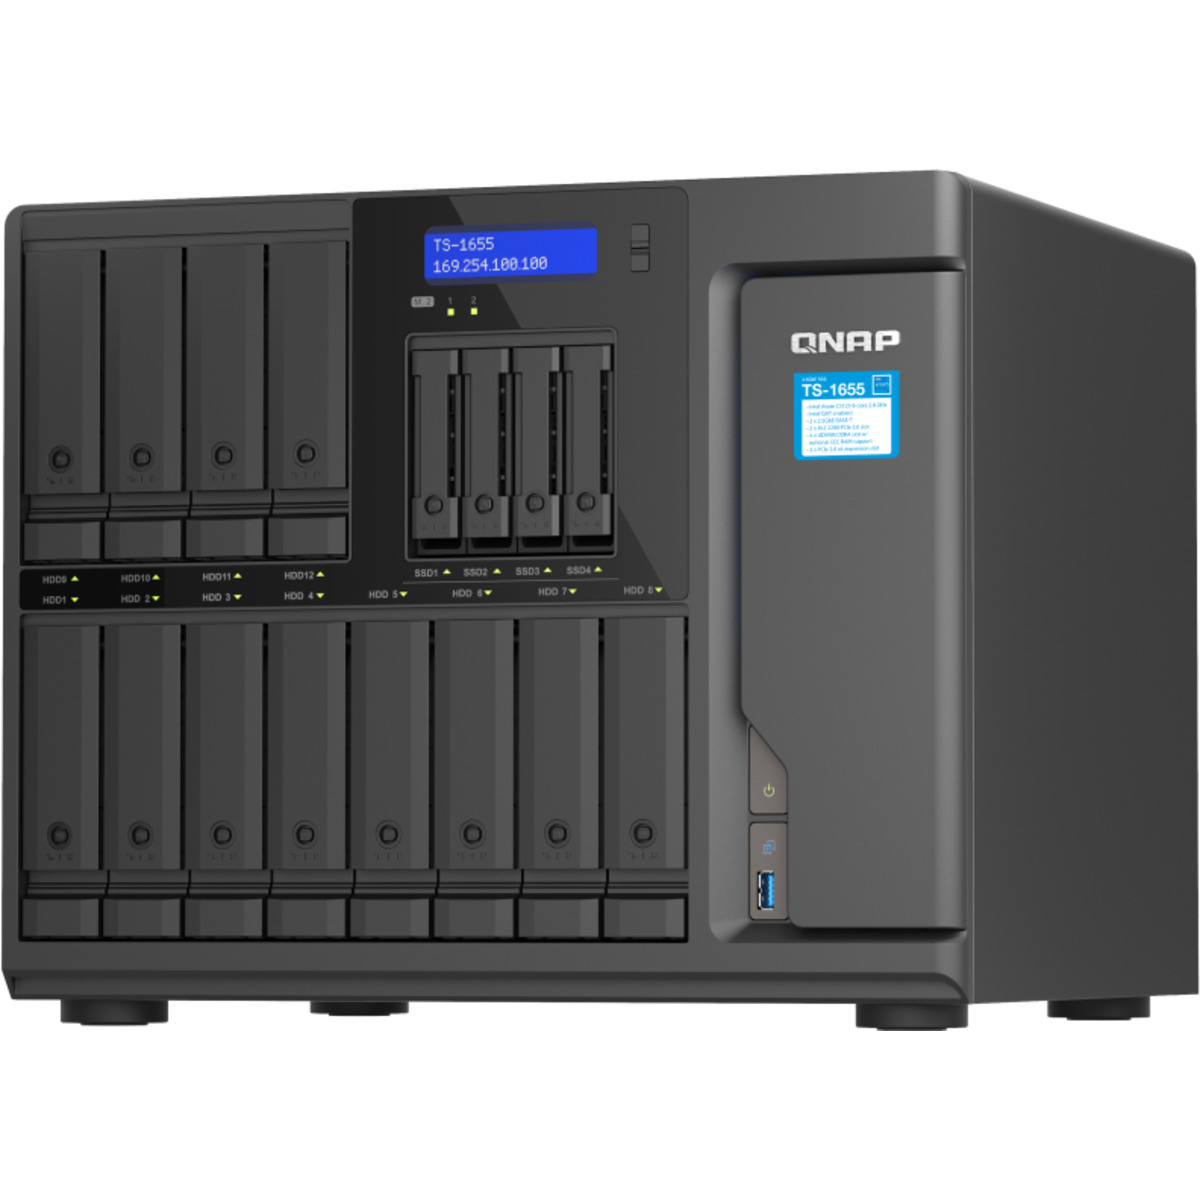 QNAP TS-1655 200tb 12+4-Bay Desktop Multimedia / Power User / Business NAS - Network Attached Storage Device 10x20tb Toshiba Enterprise Capacity MG10ACA20TE 3.5 7200rpm SATA 6Gb/s HDD ENTERPRISE Class Drives Installed - Burn-In Tested - FREE RAM UPGRADE TS-1655